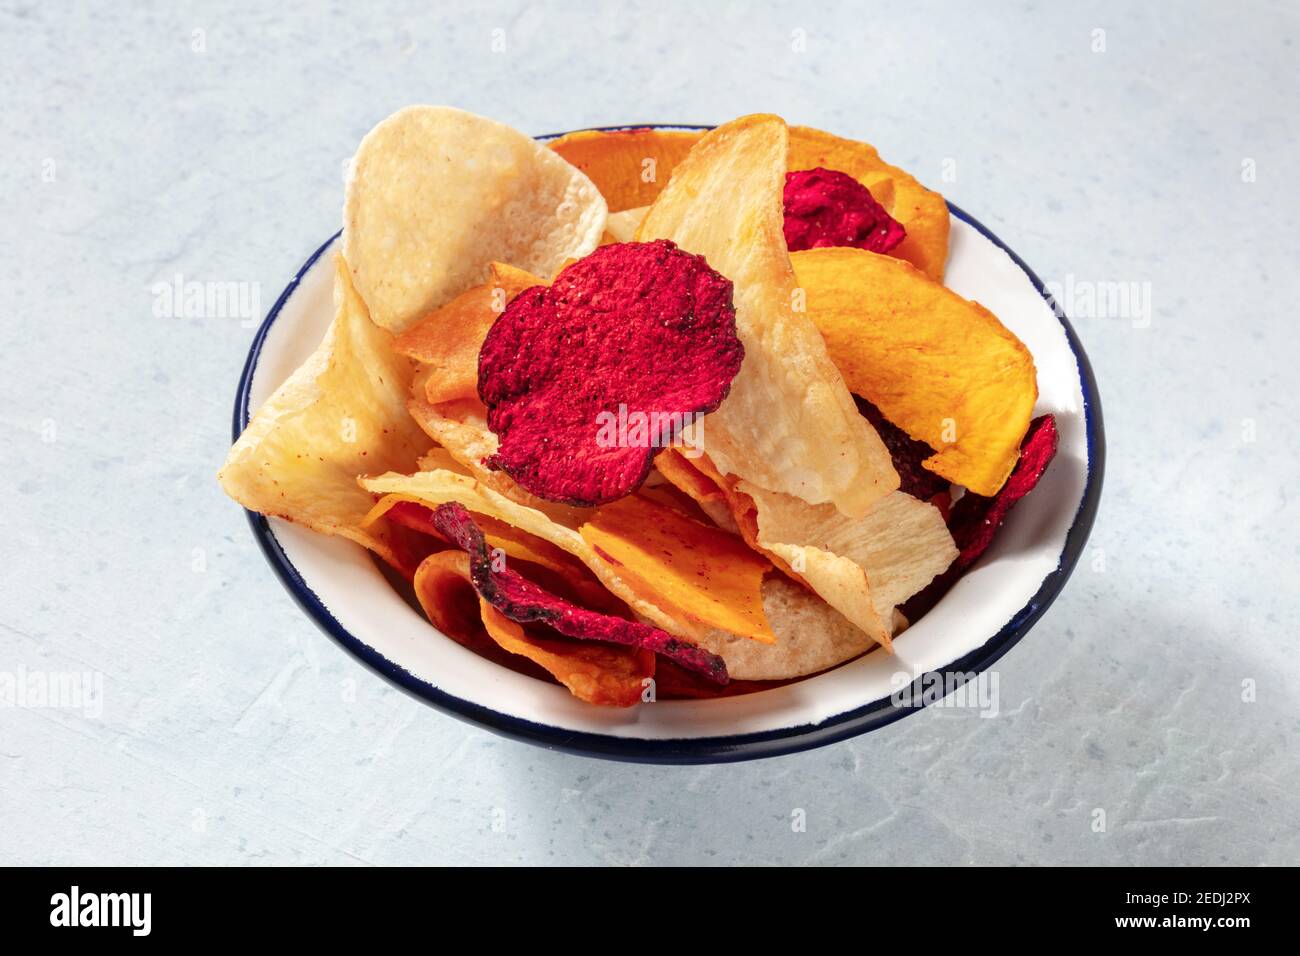 Fruit and vegetable chips in a bowl, a healthy vegan snack Stock Photo